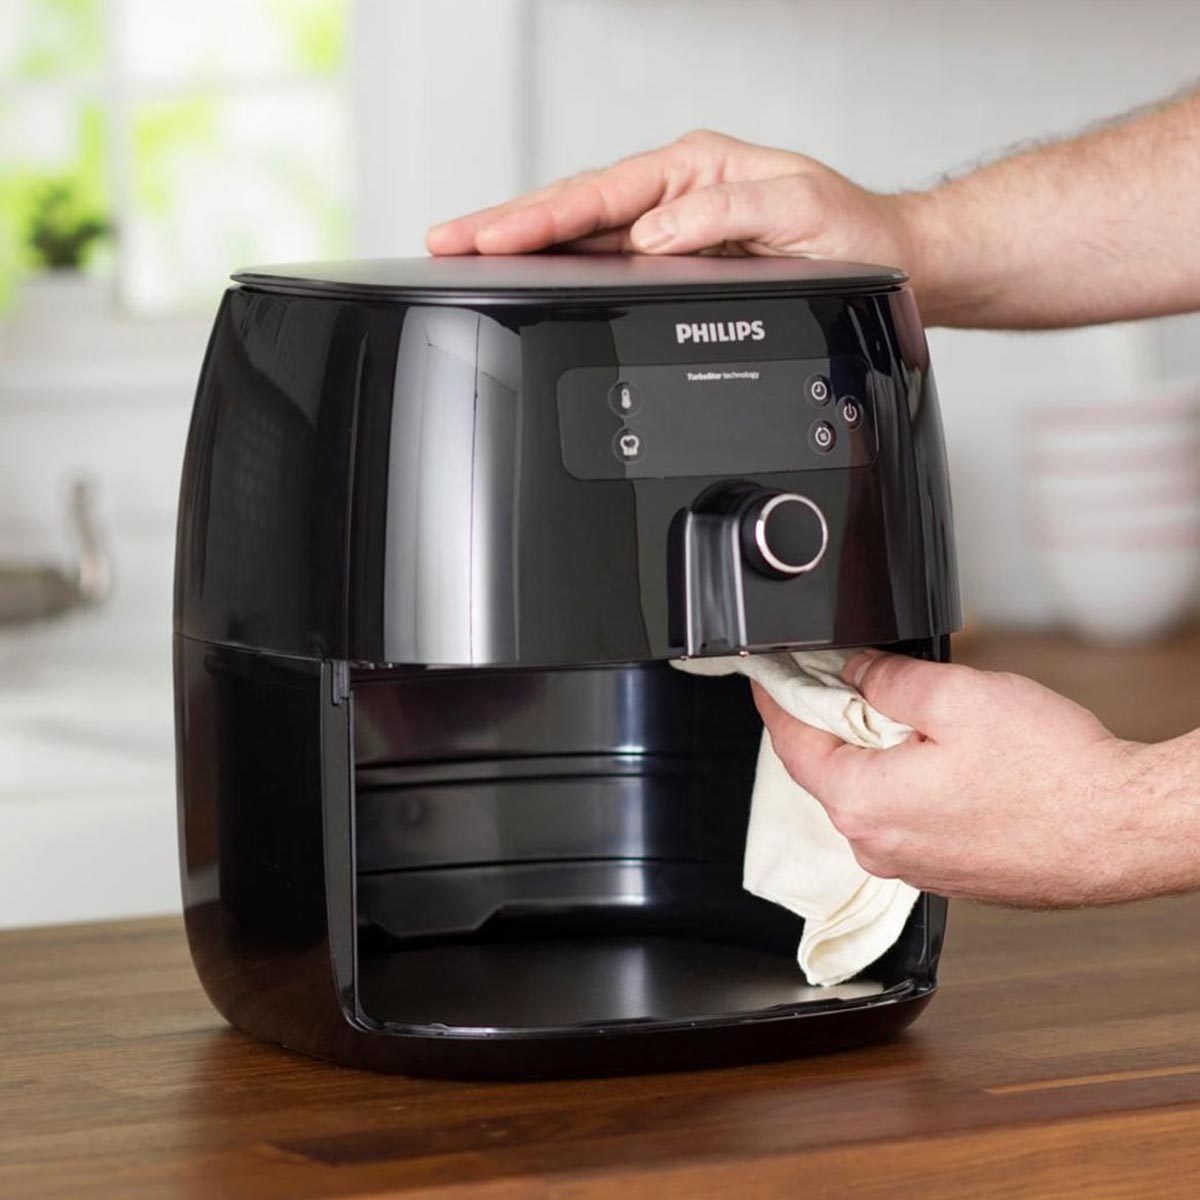 The Best Way to Clean an Air Fryer